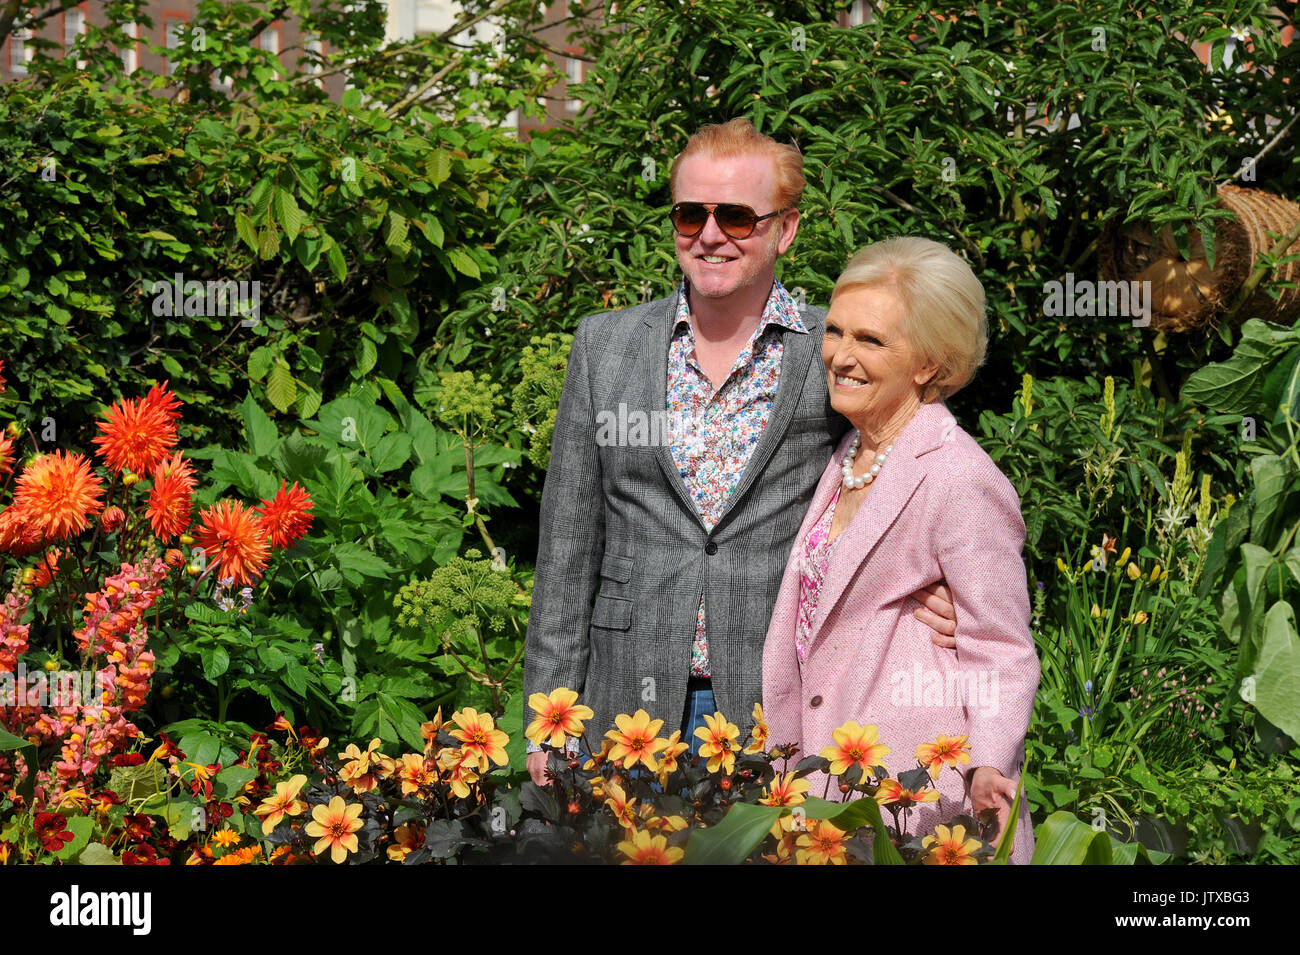 Chris Evans, English presenter, businessman and producer for radio and television with Mary Berry, British food writer and television presenter. Stock Photo